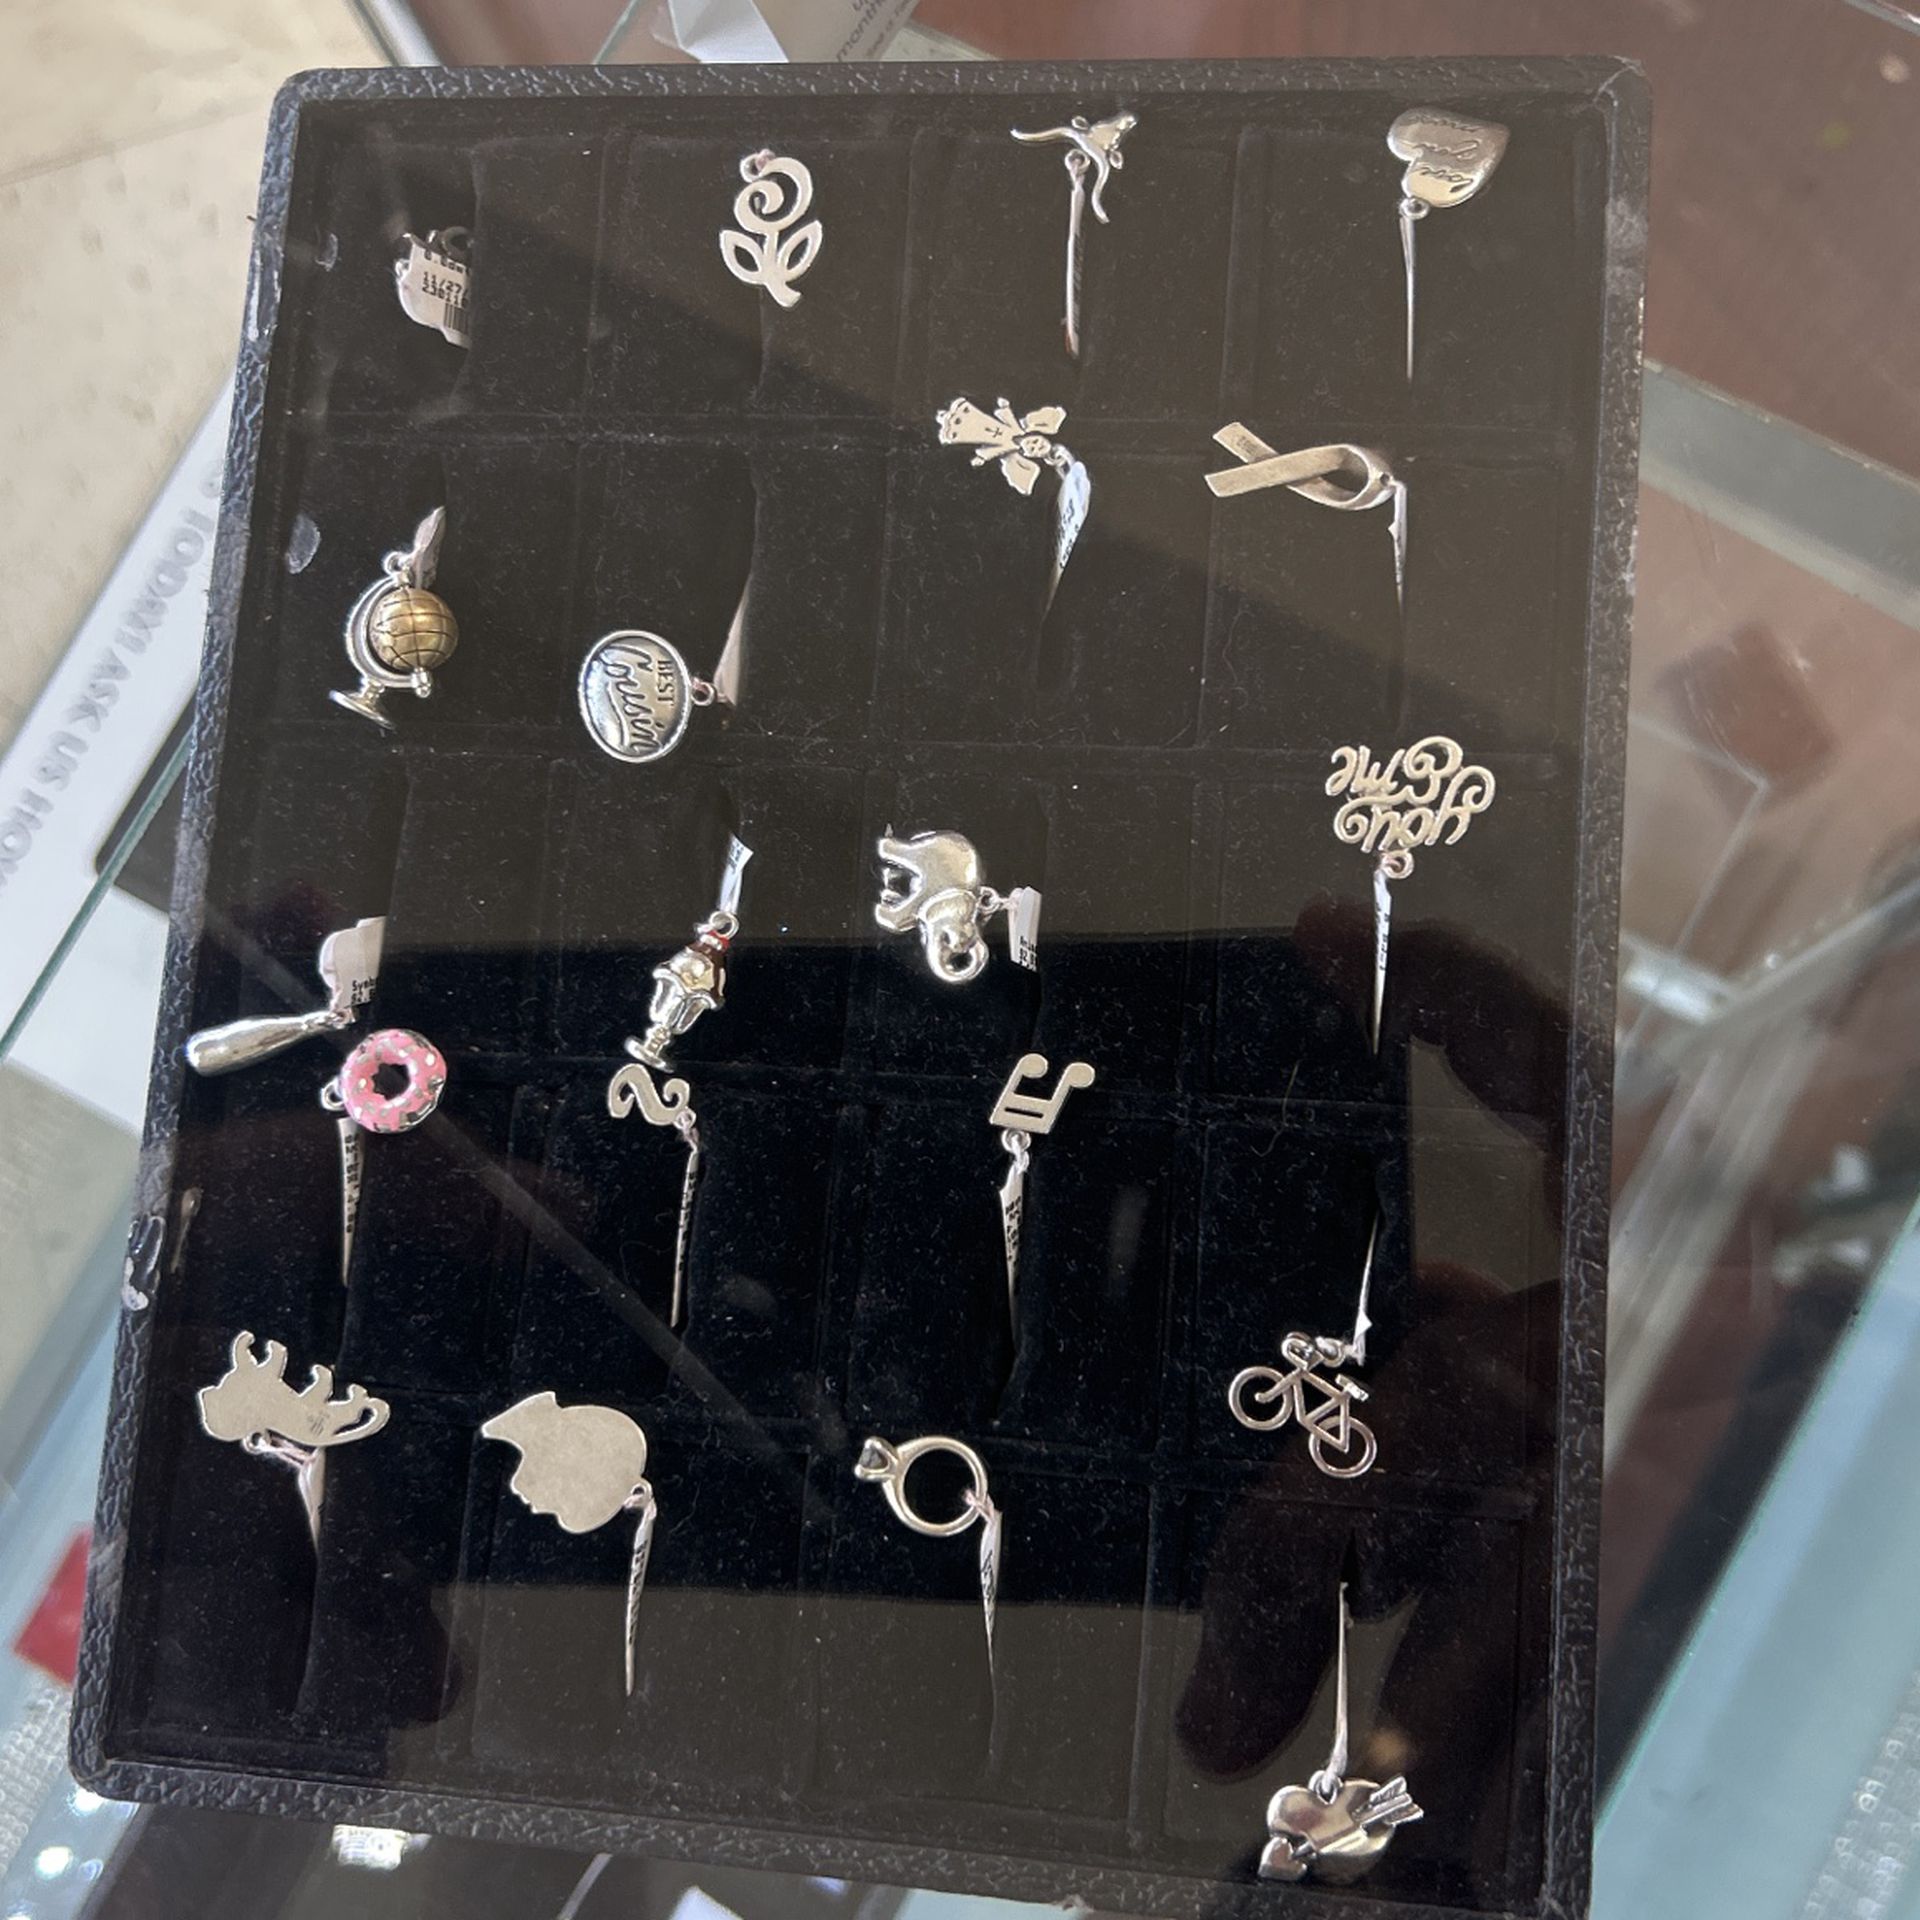 James Avery Charms